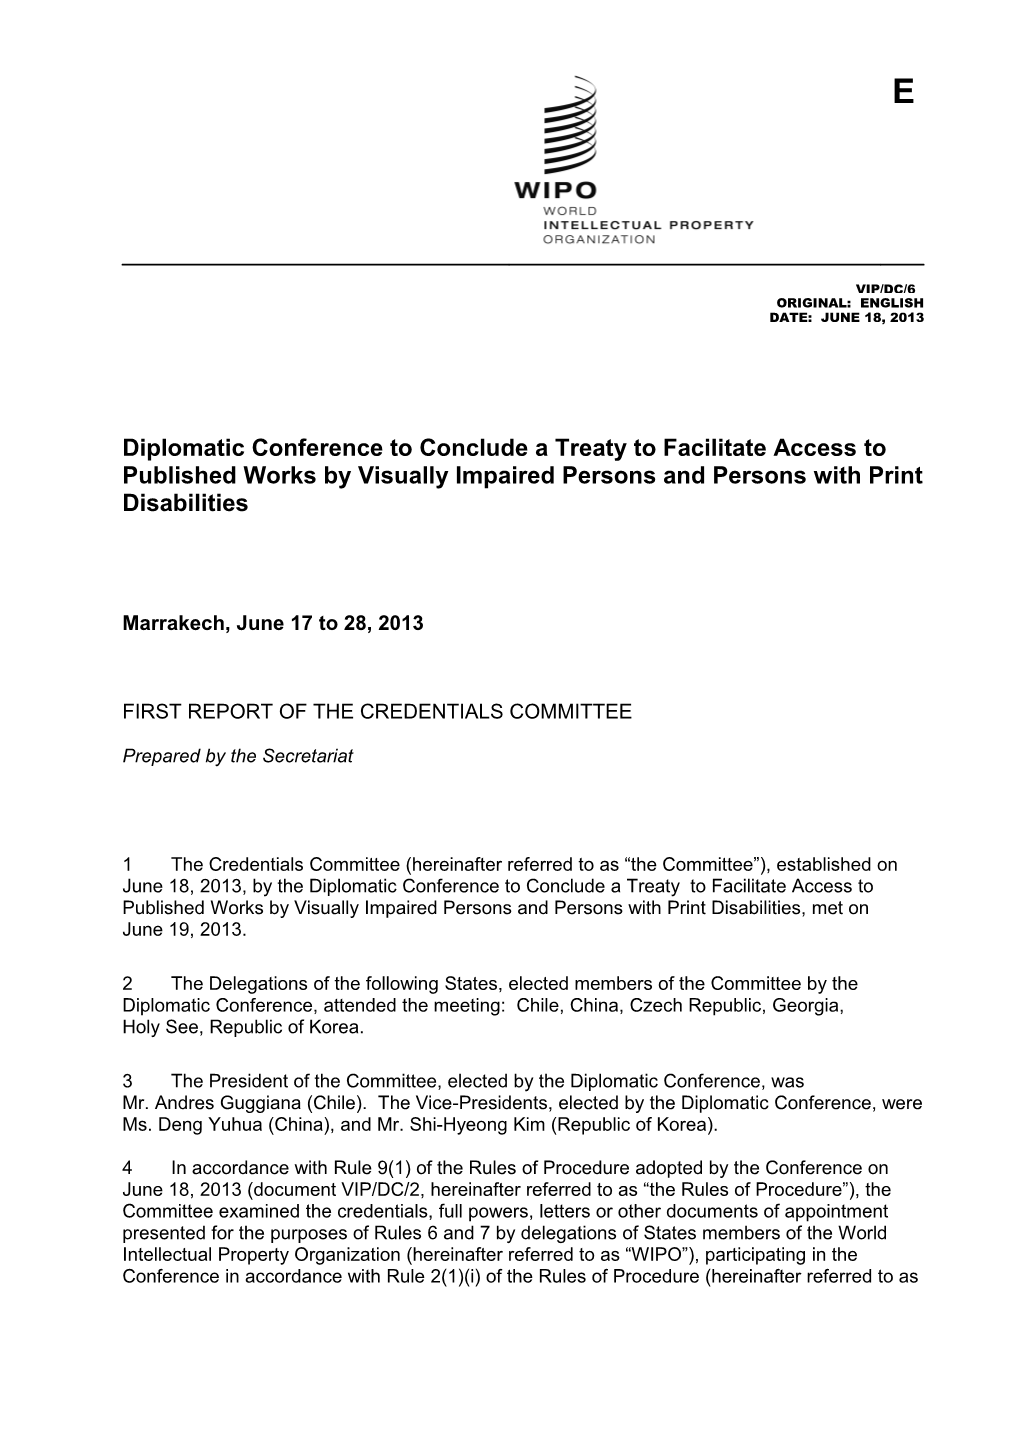 First REPORT of the CREDENTIALS COMMITTEE